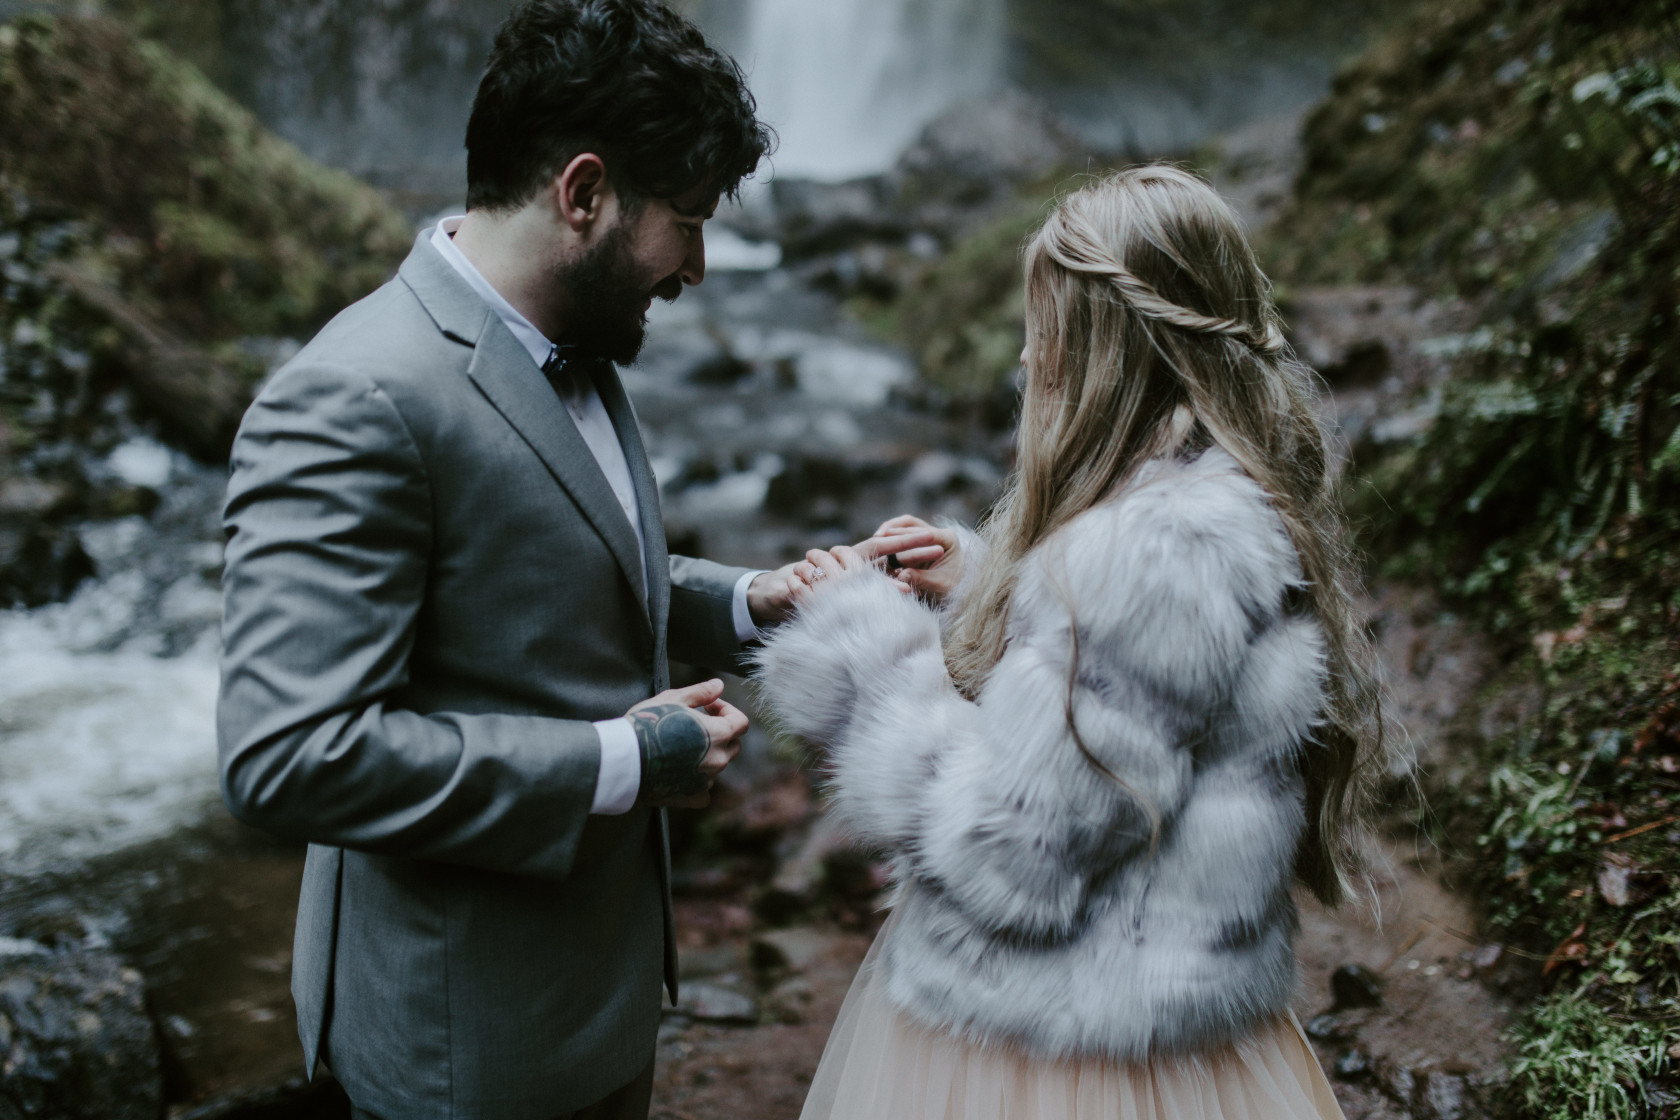 Tyanna puts a ring on Boris finger at Latourell Falls, OR. Adventure elopement in the Columbia River Gorge by Sienna Plus Josh.